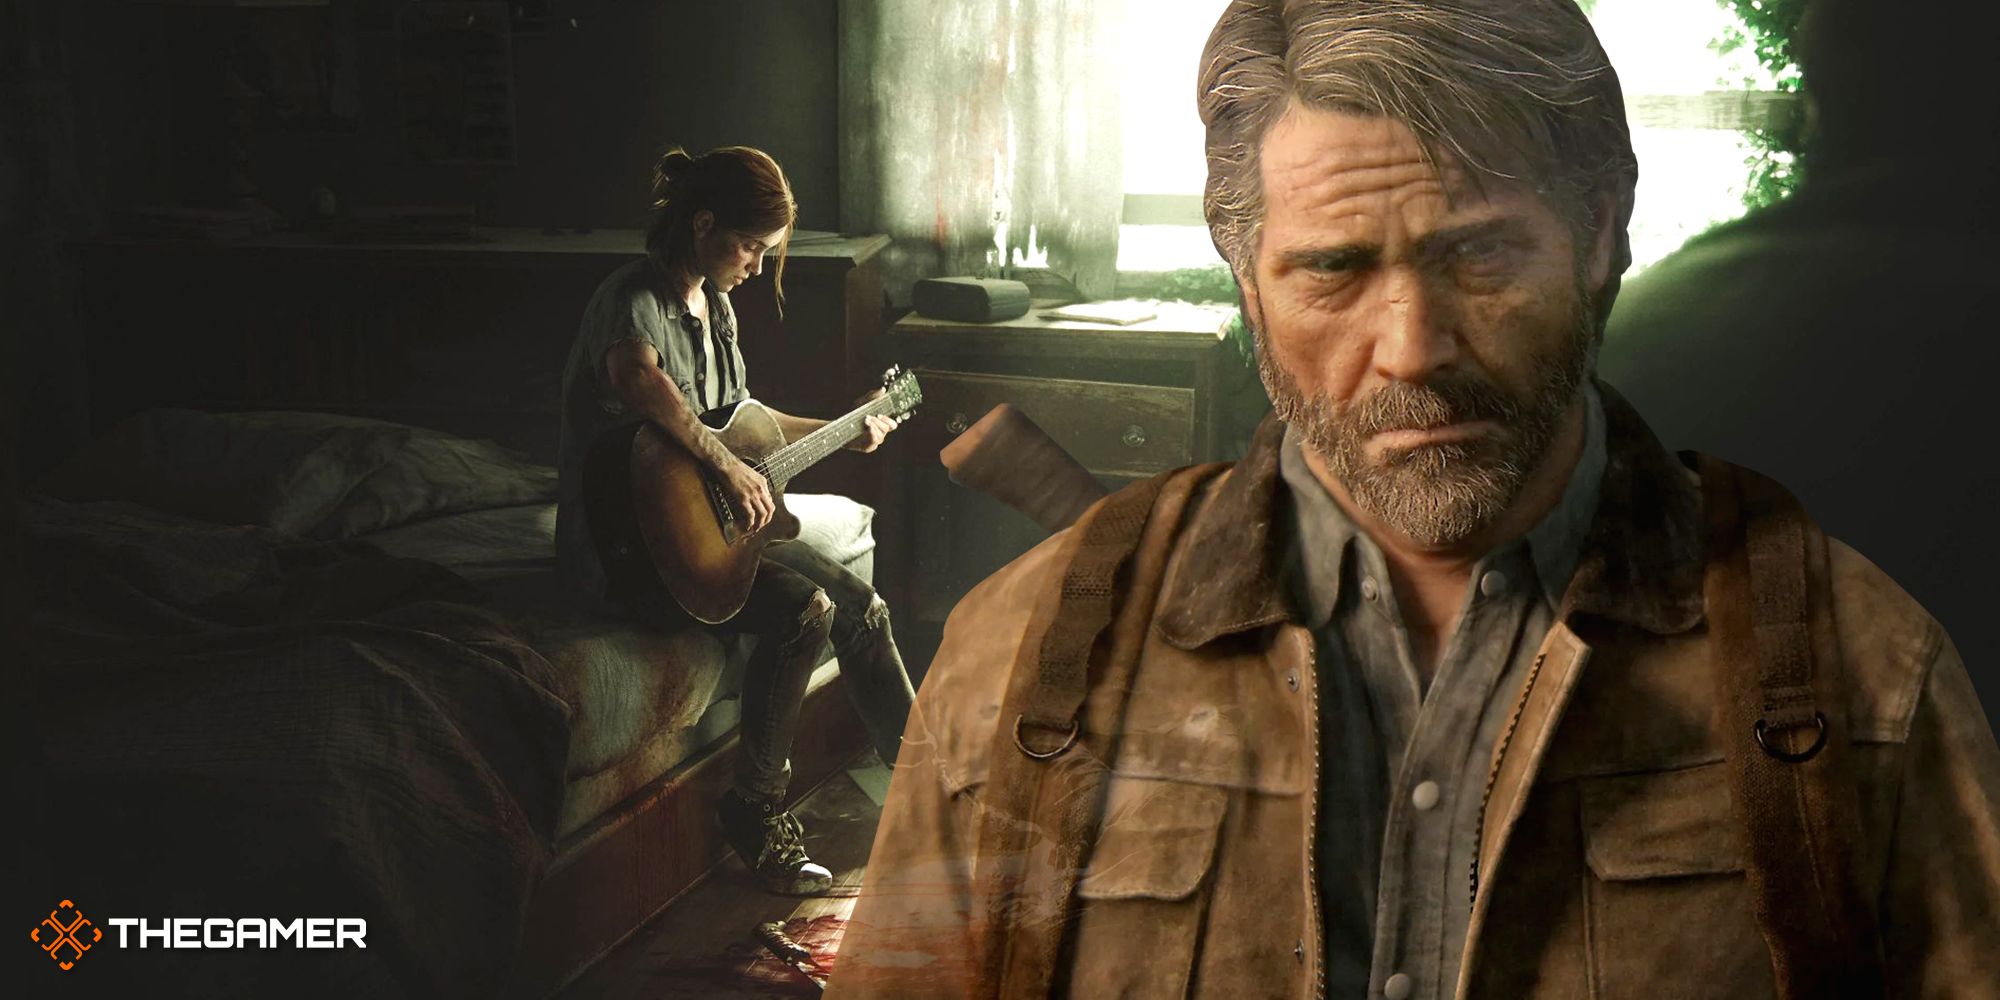 Ellie sitting on her bed and playing the guitar with a sad looking Joel on the right